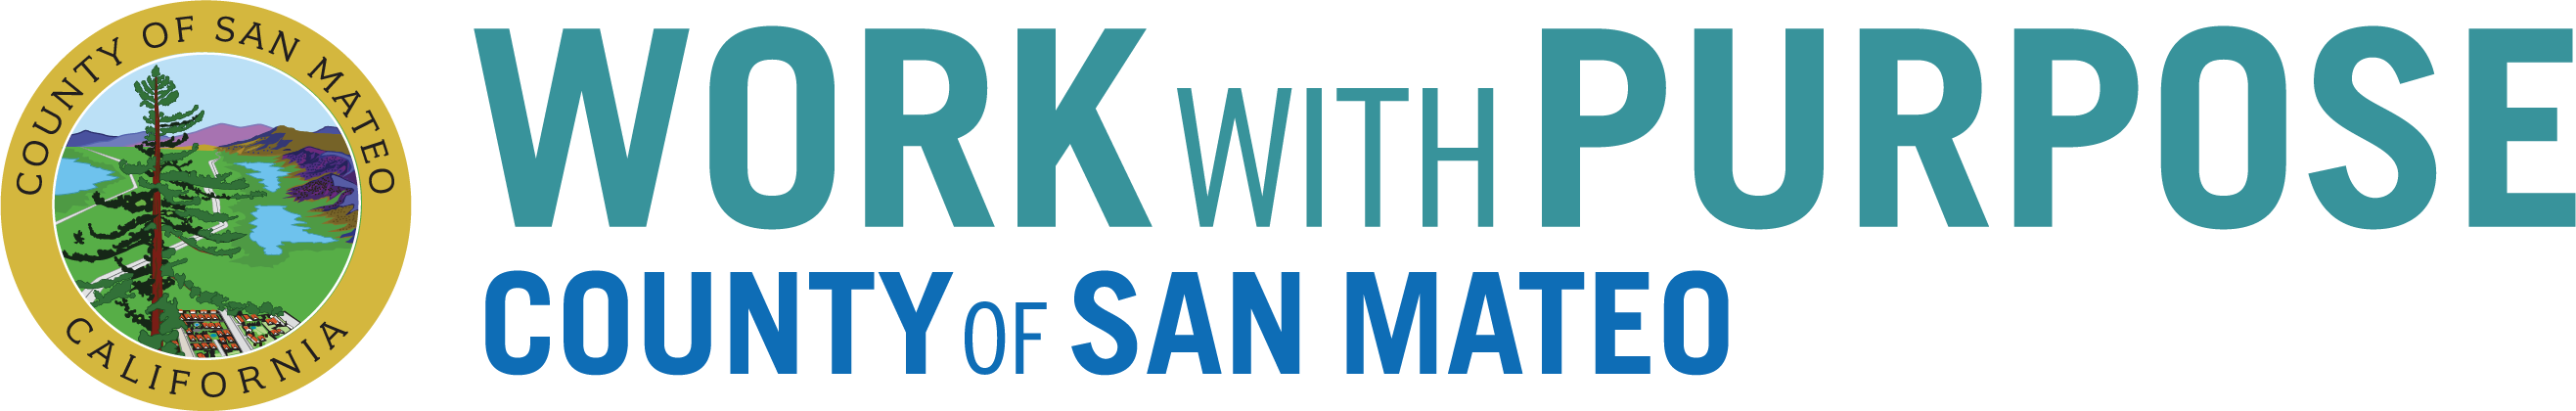 Work with Purpose | County of San Mateo